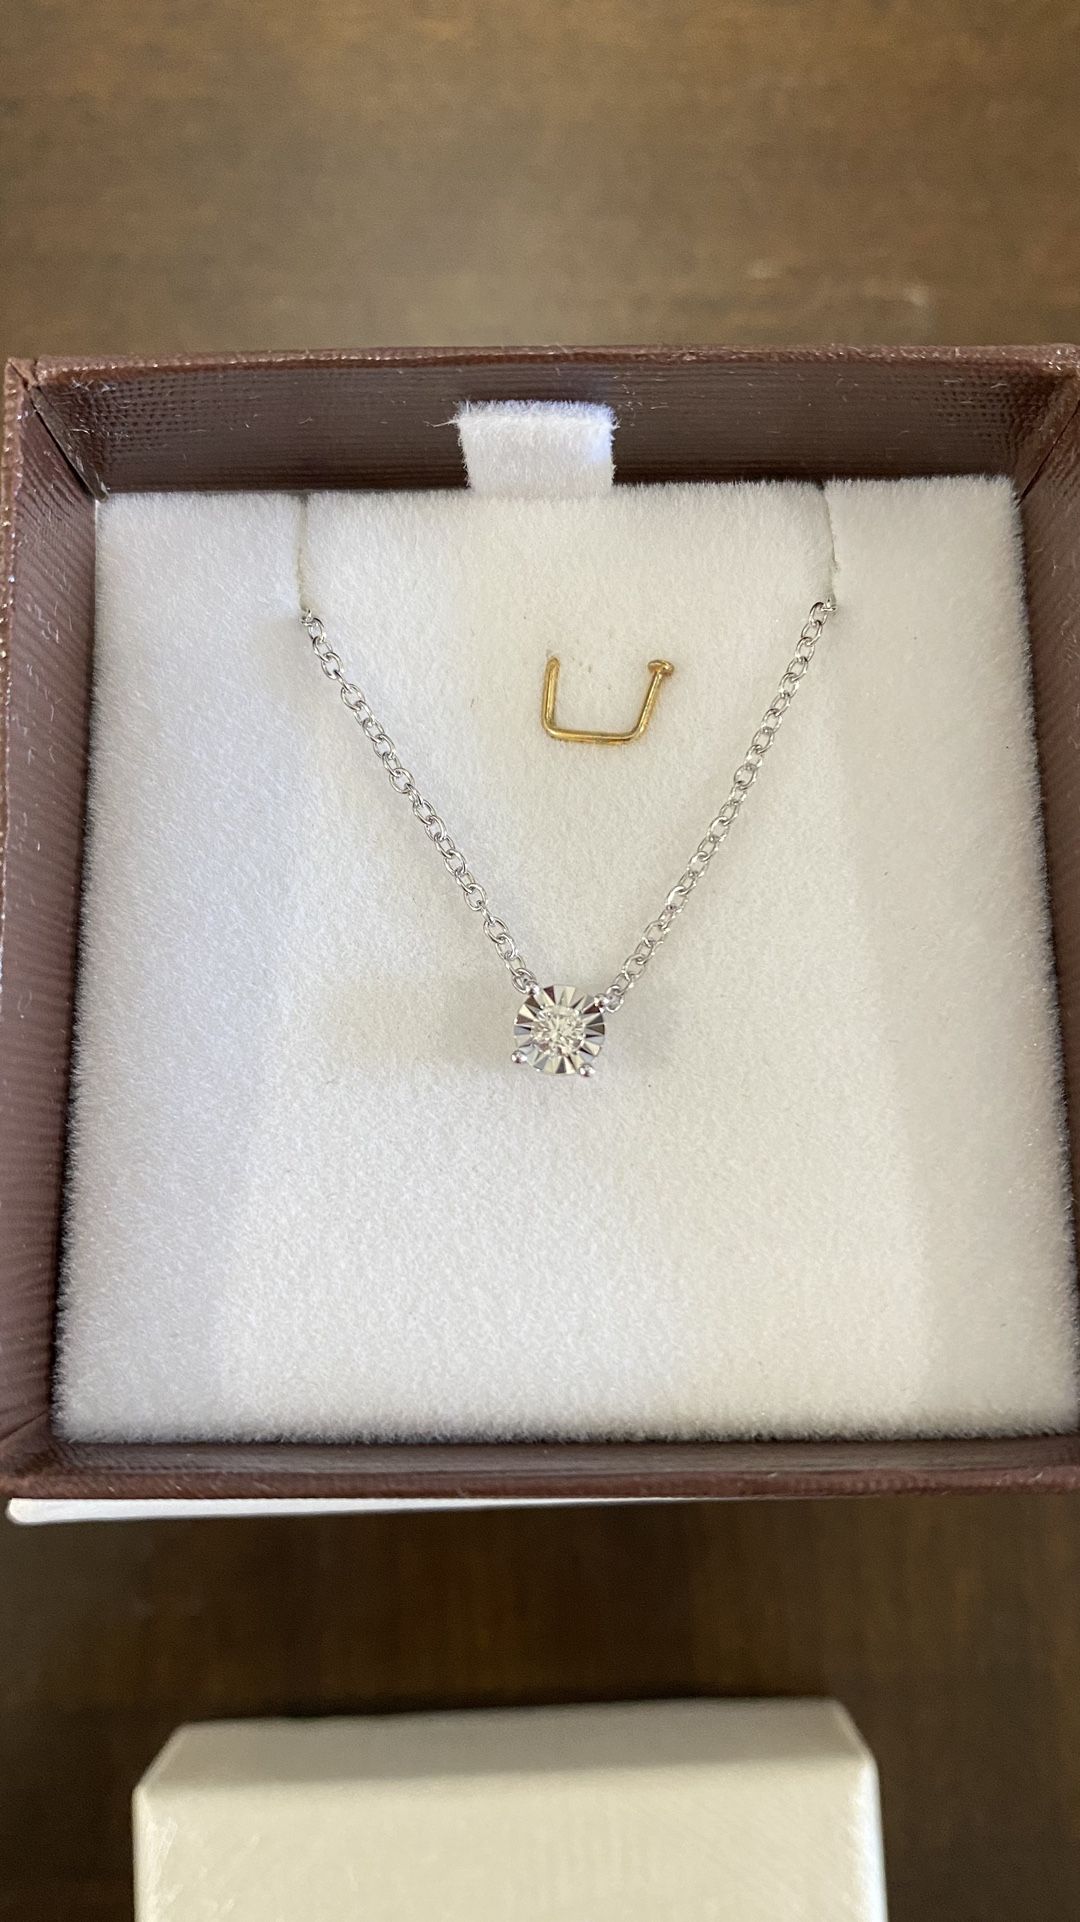 1/10 ct lab created diamond sterling silver necklace 